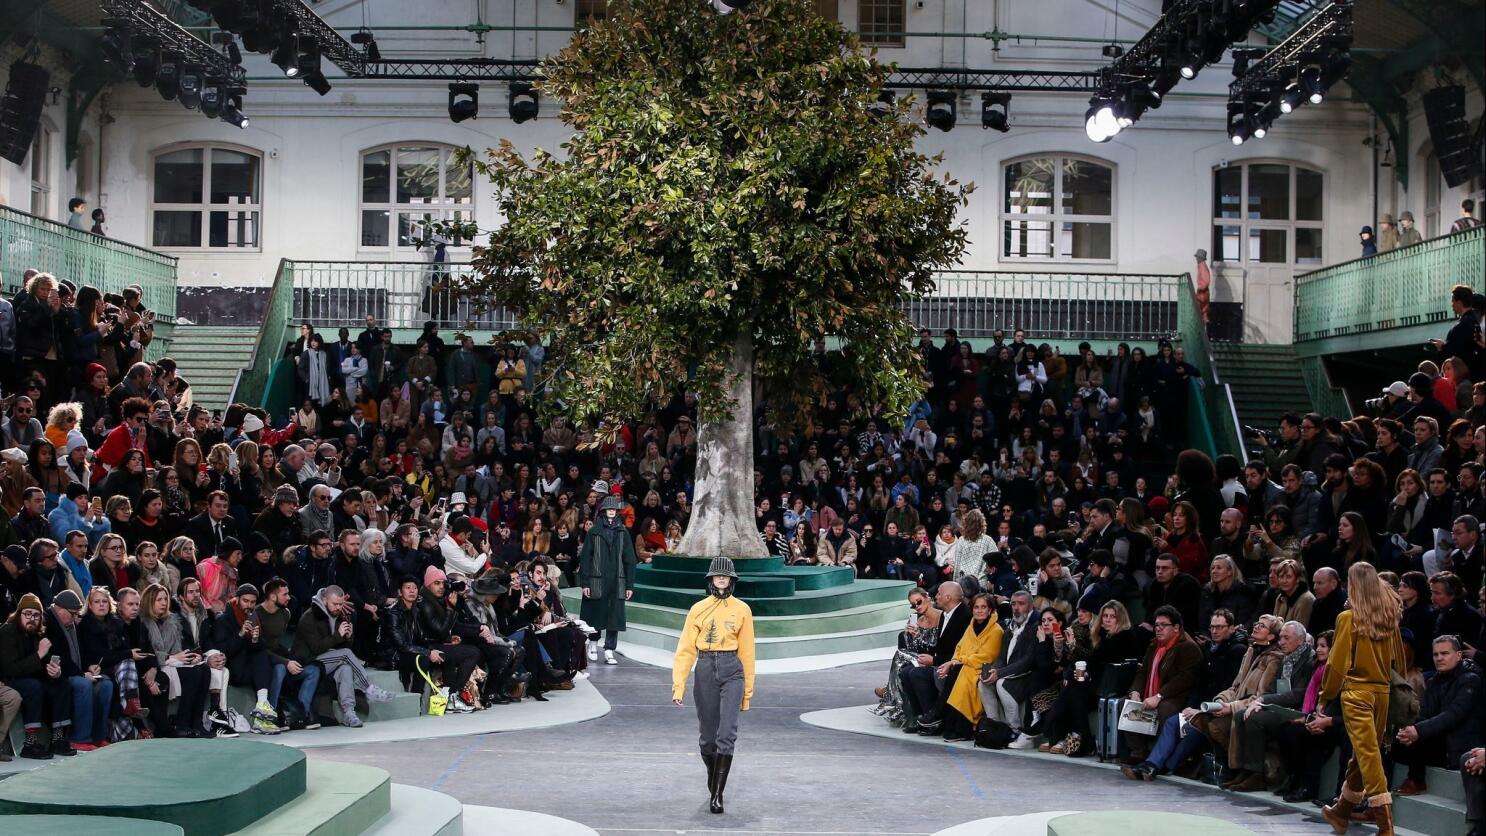 At Fashion Lacoste walks in the woods, goes golfing and tries to save some species - Los Times